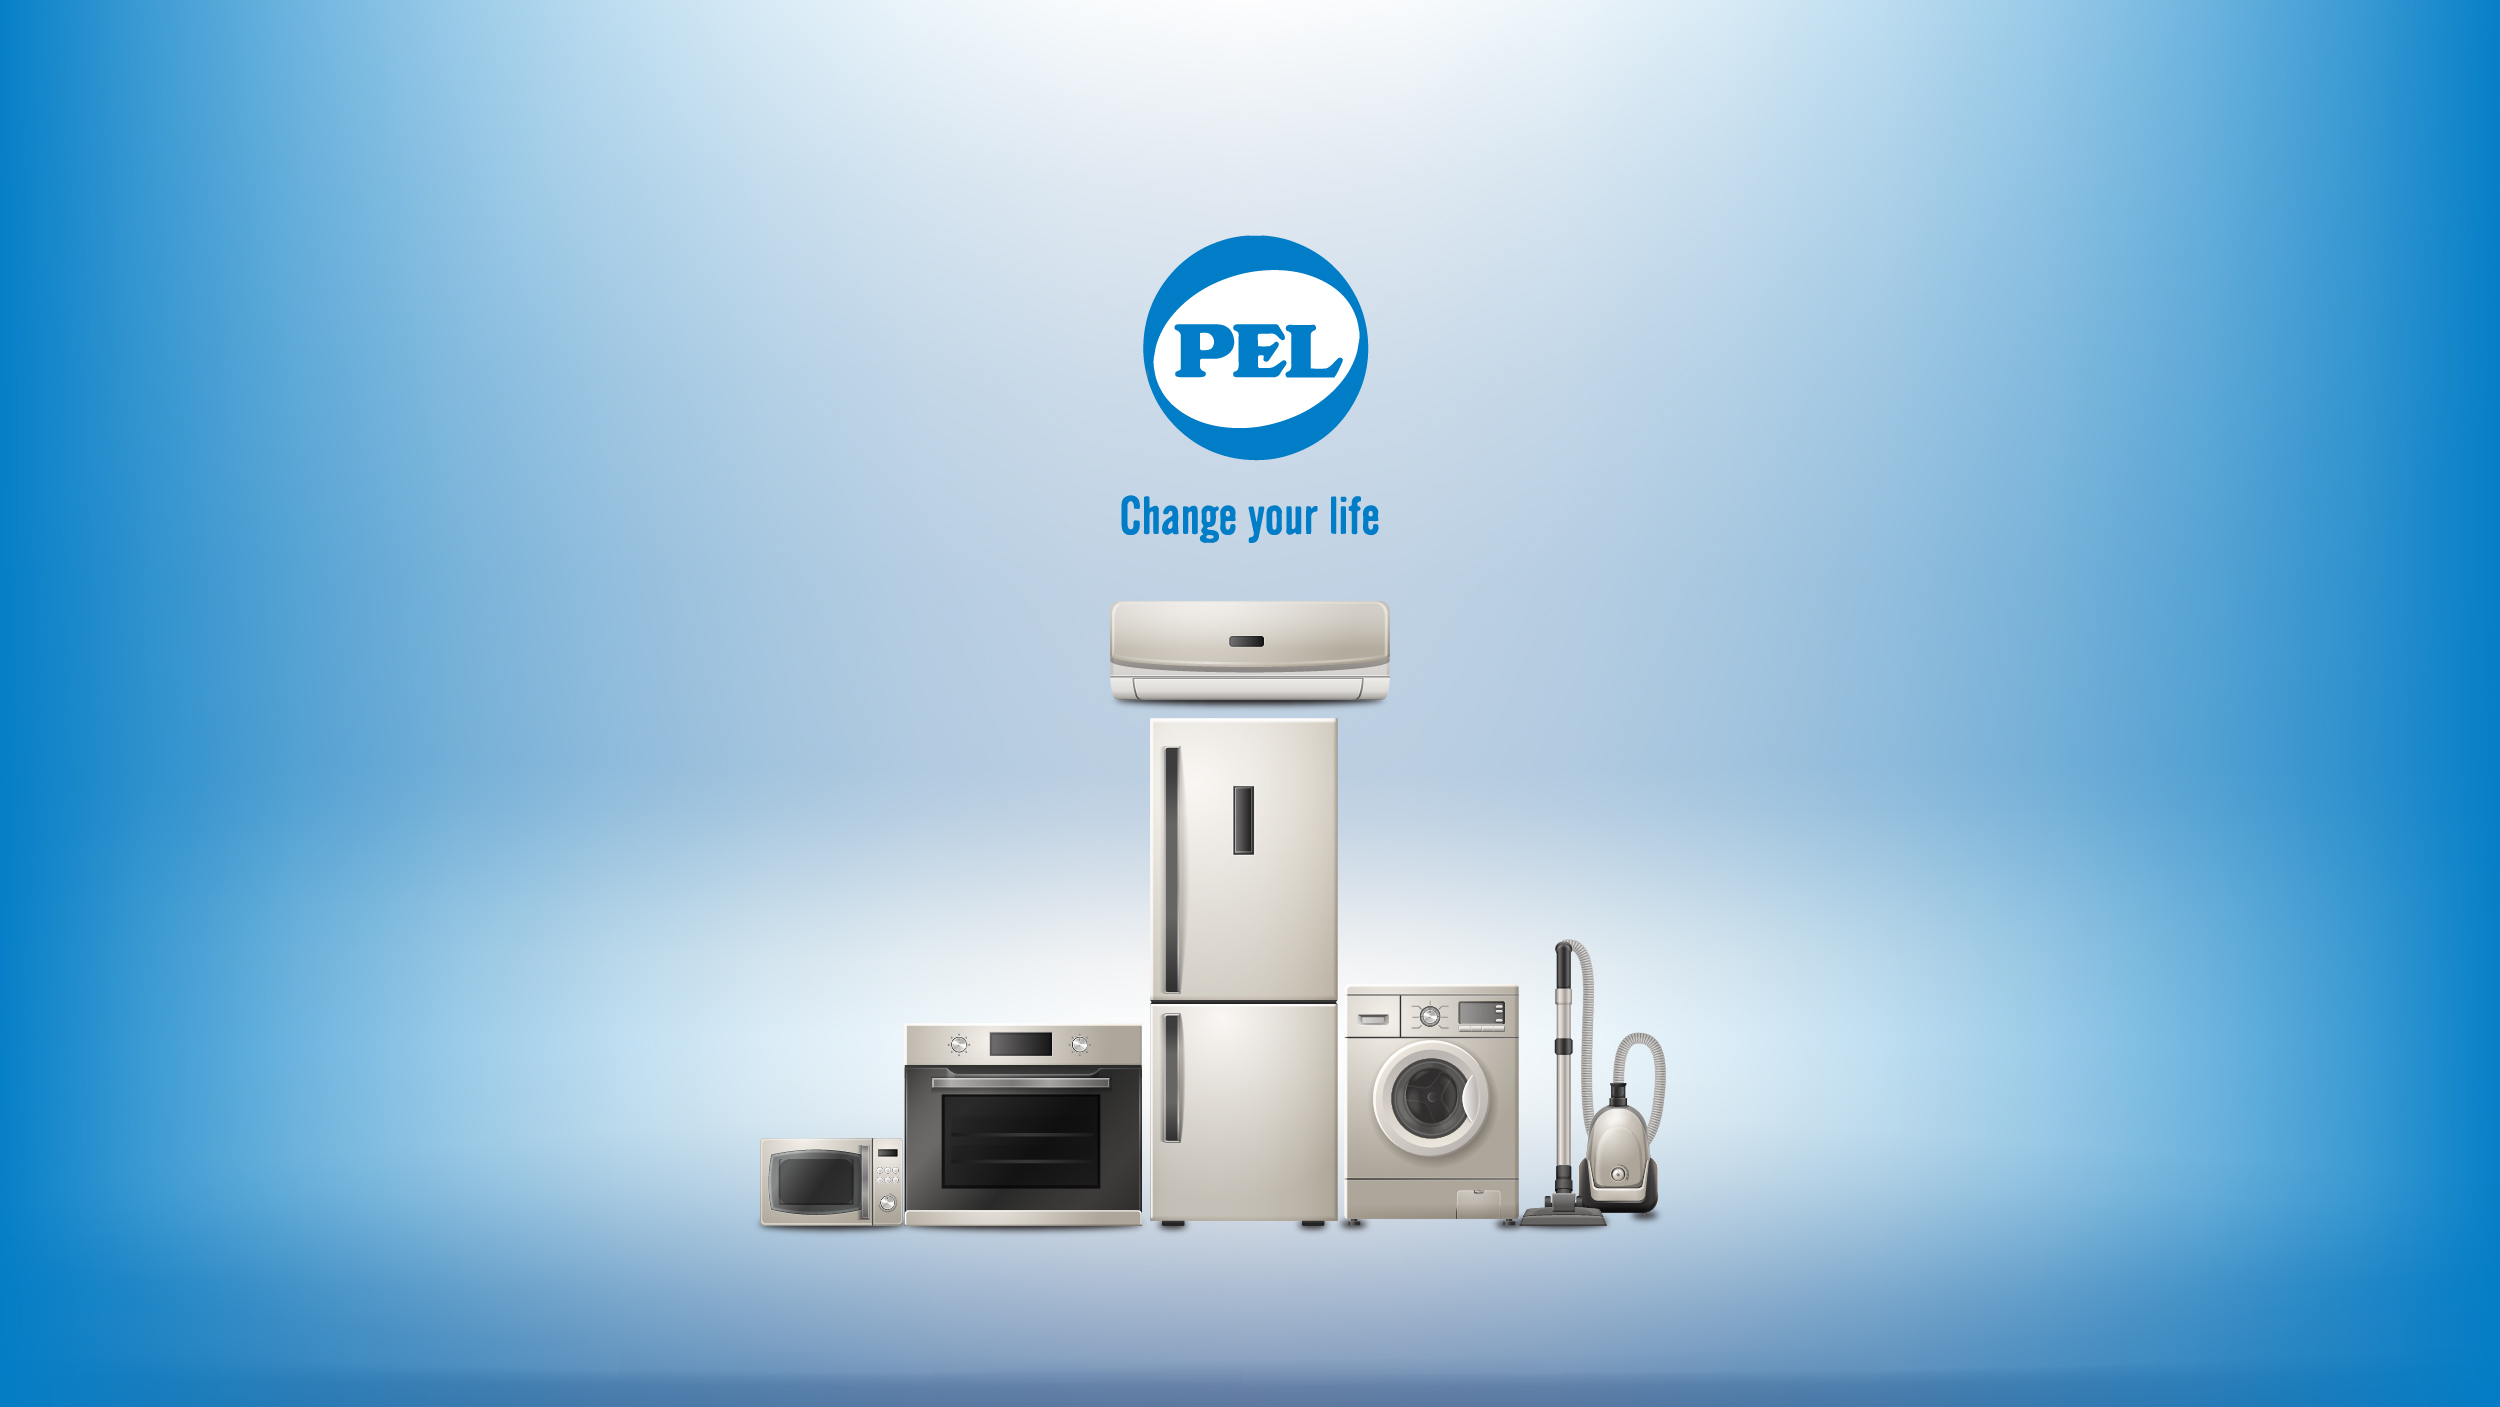 PEL - Change Your Life With The Best Home Appliances